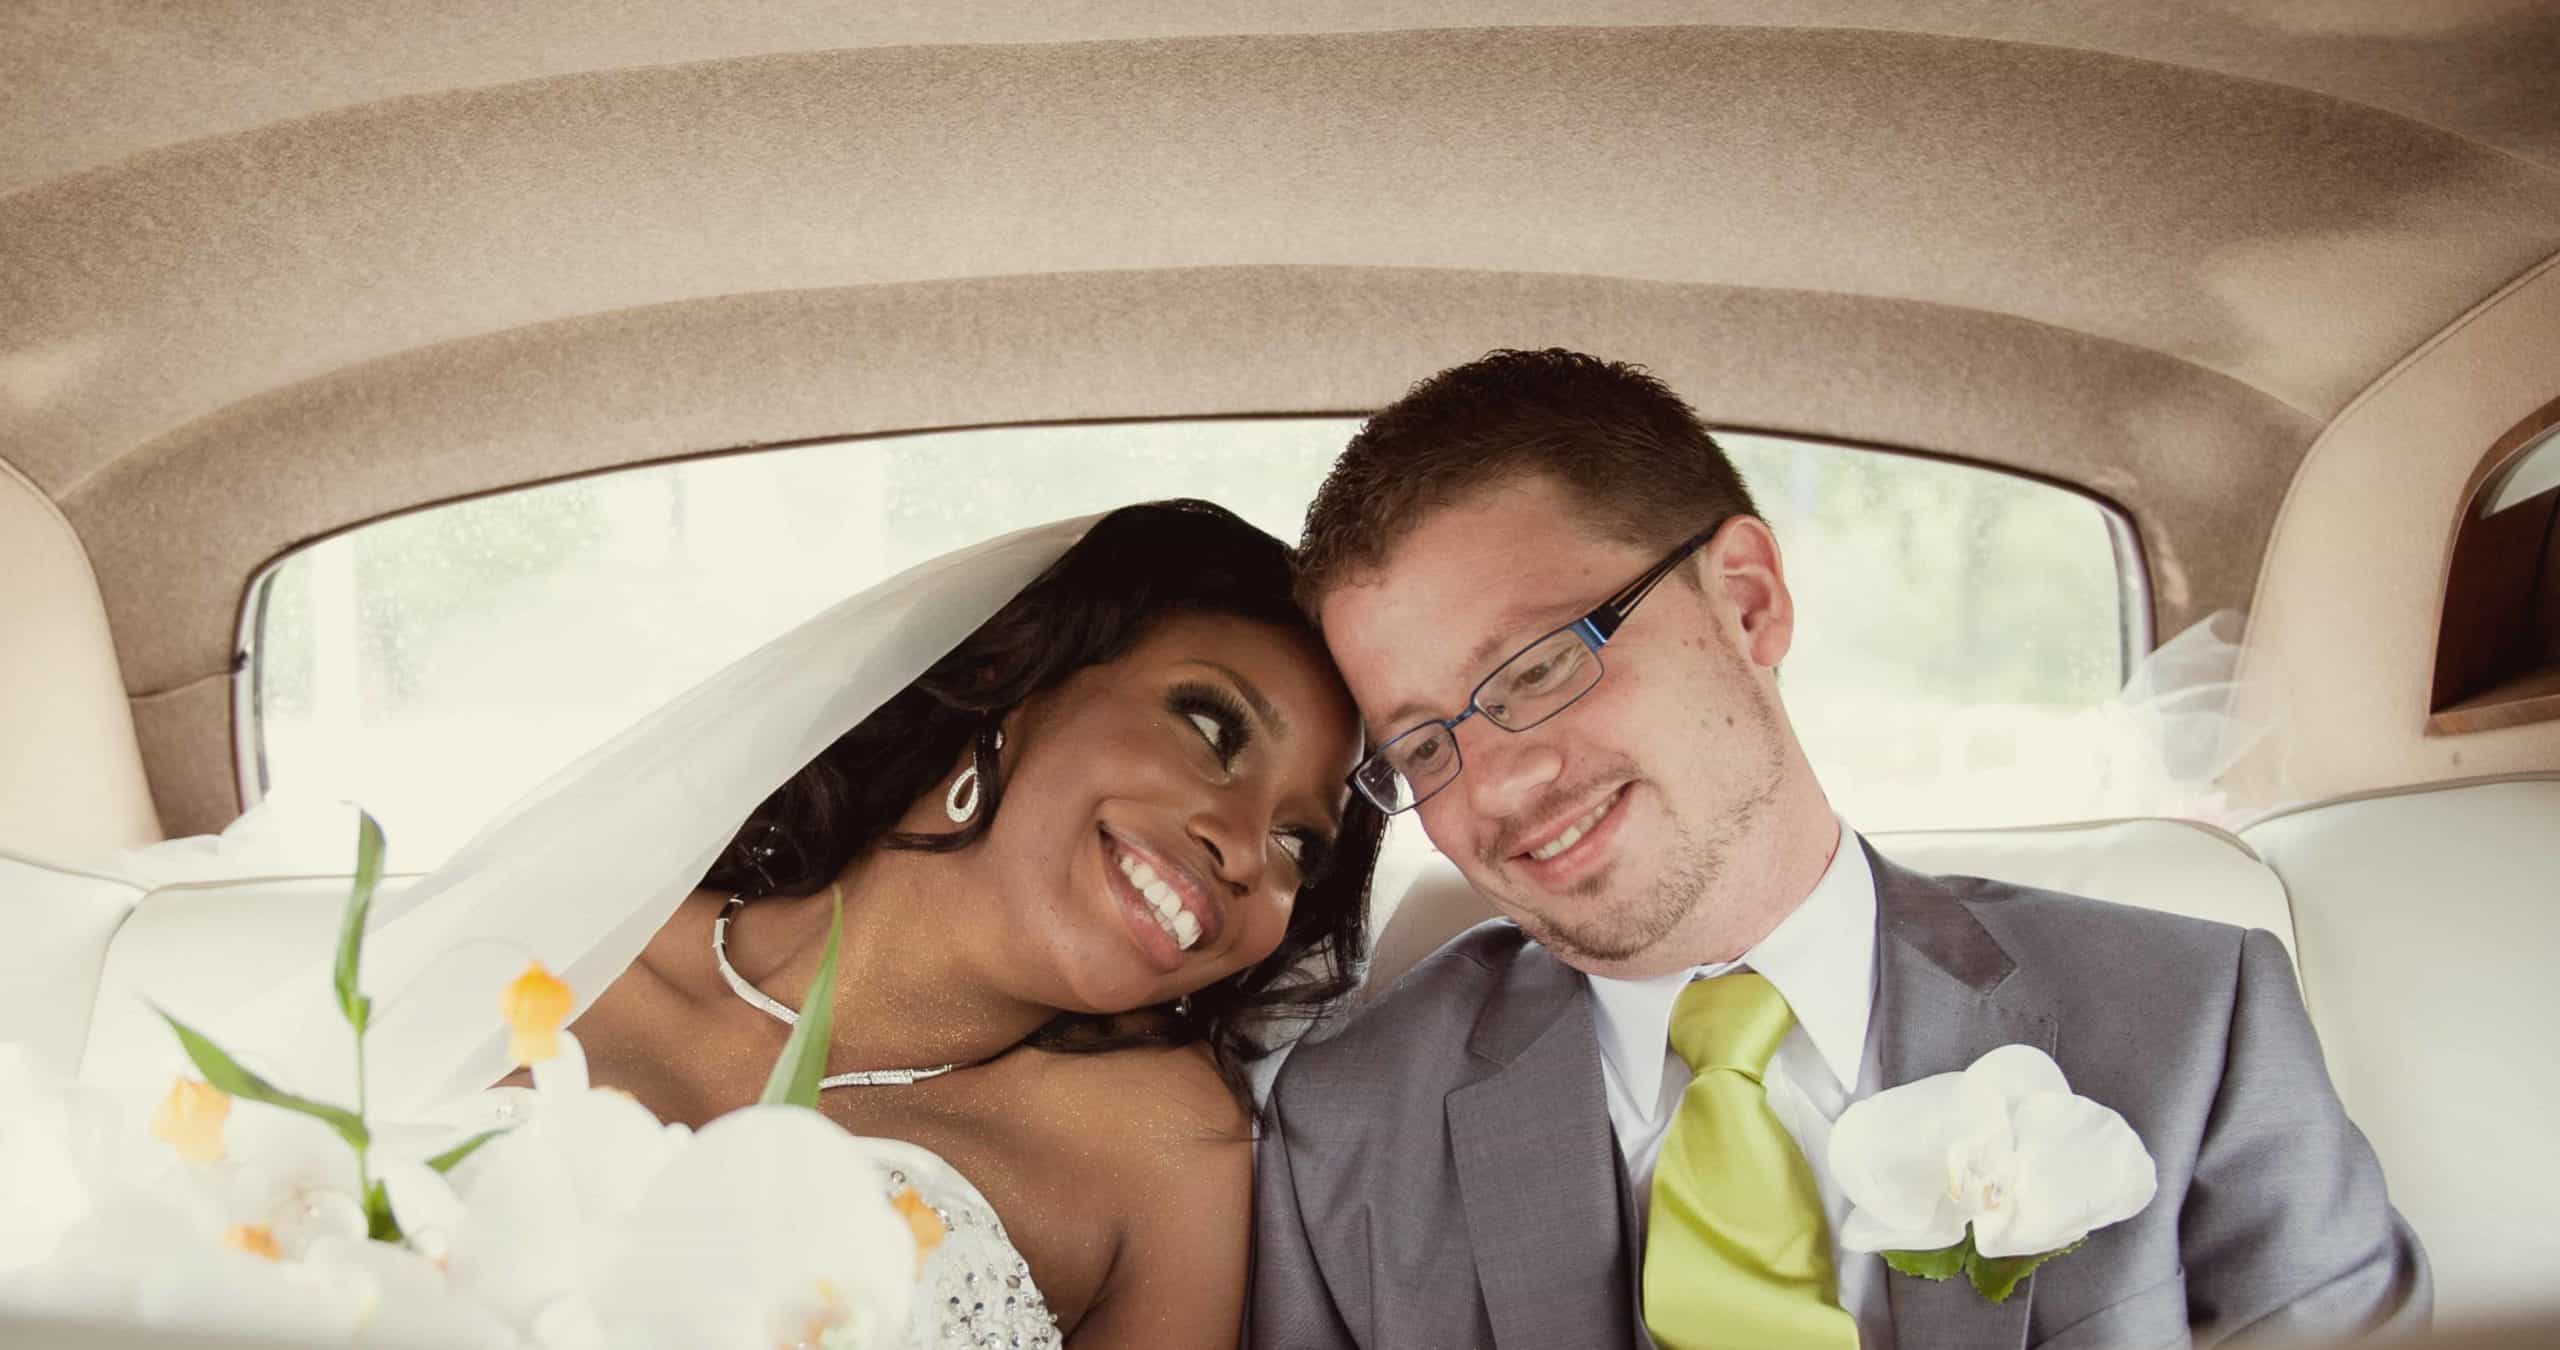 Interracial Couple Laughing - 9 Reasons to Get Married - Focus on the Family